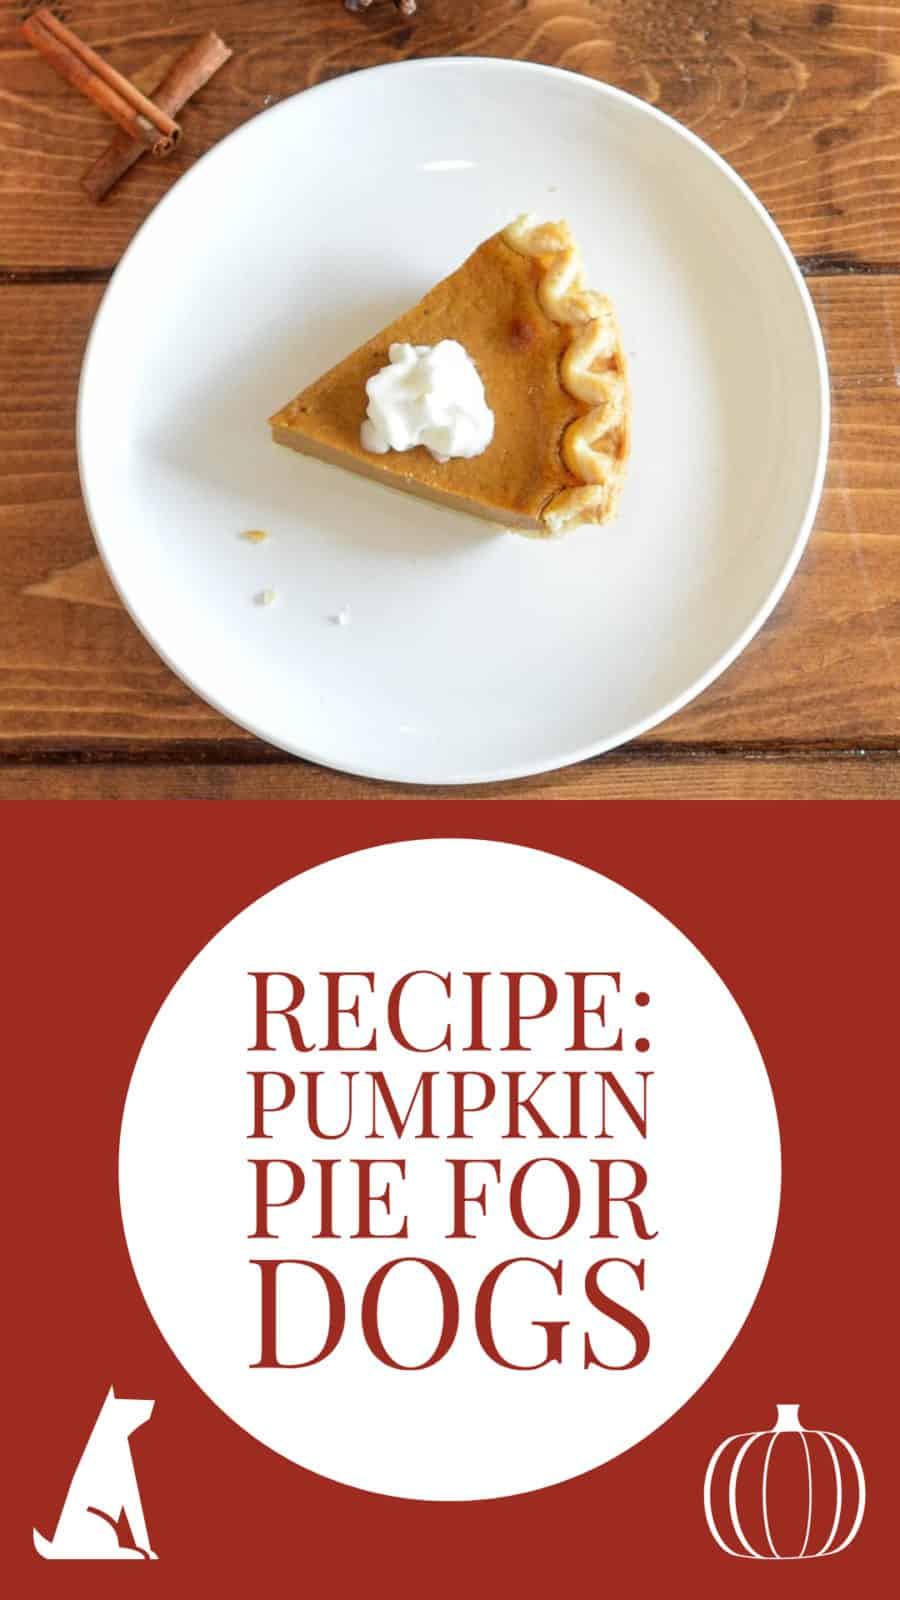 recipe for pumpkin pie for dogs